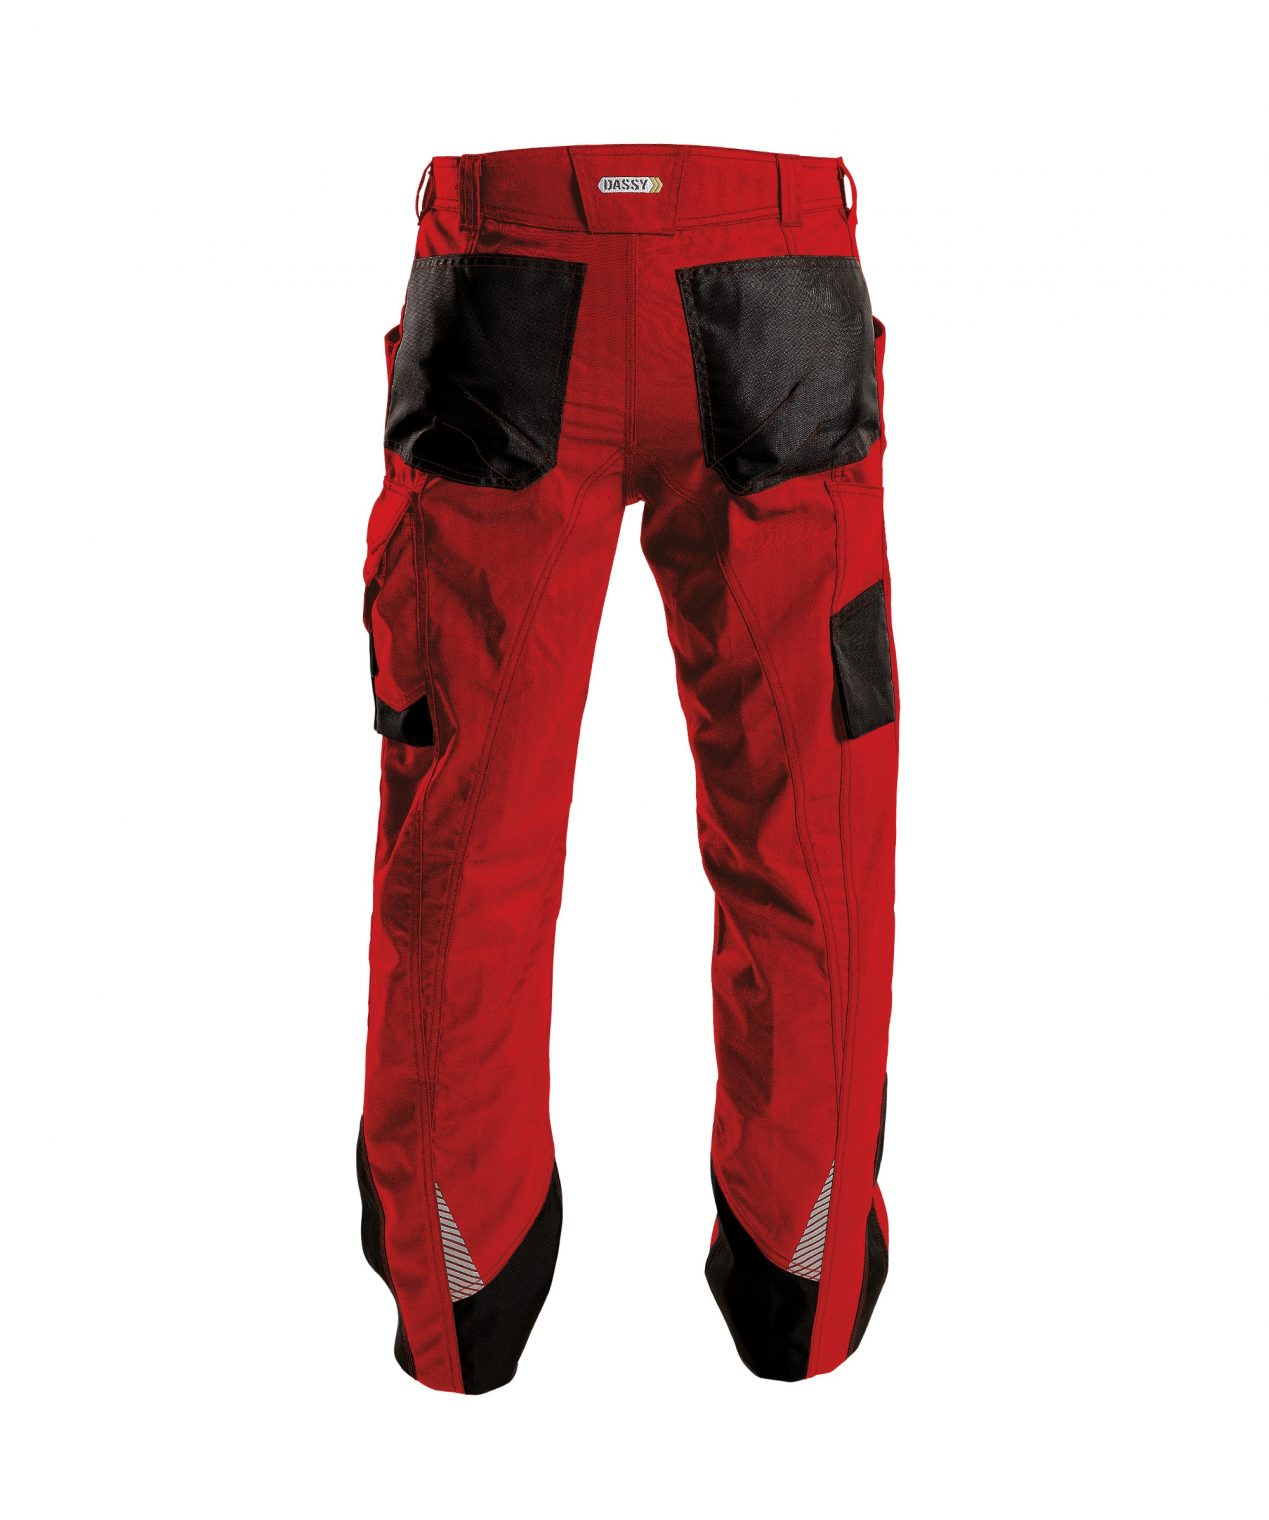 spectrum work trousers red black back